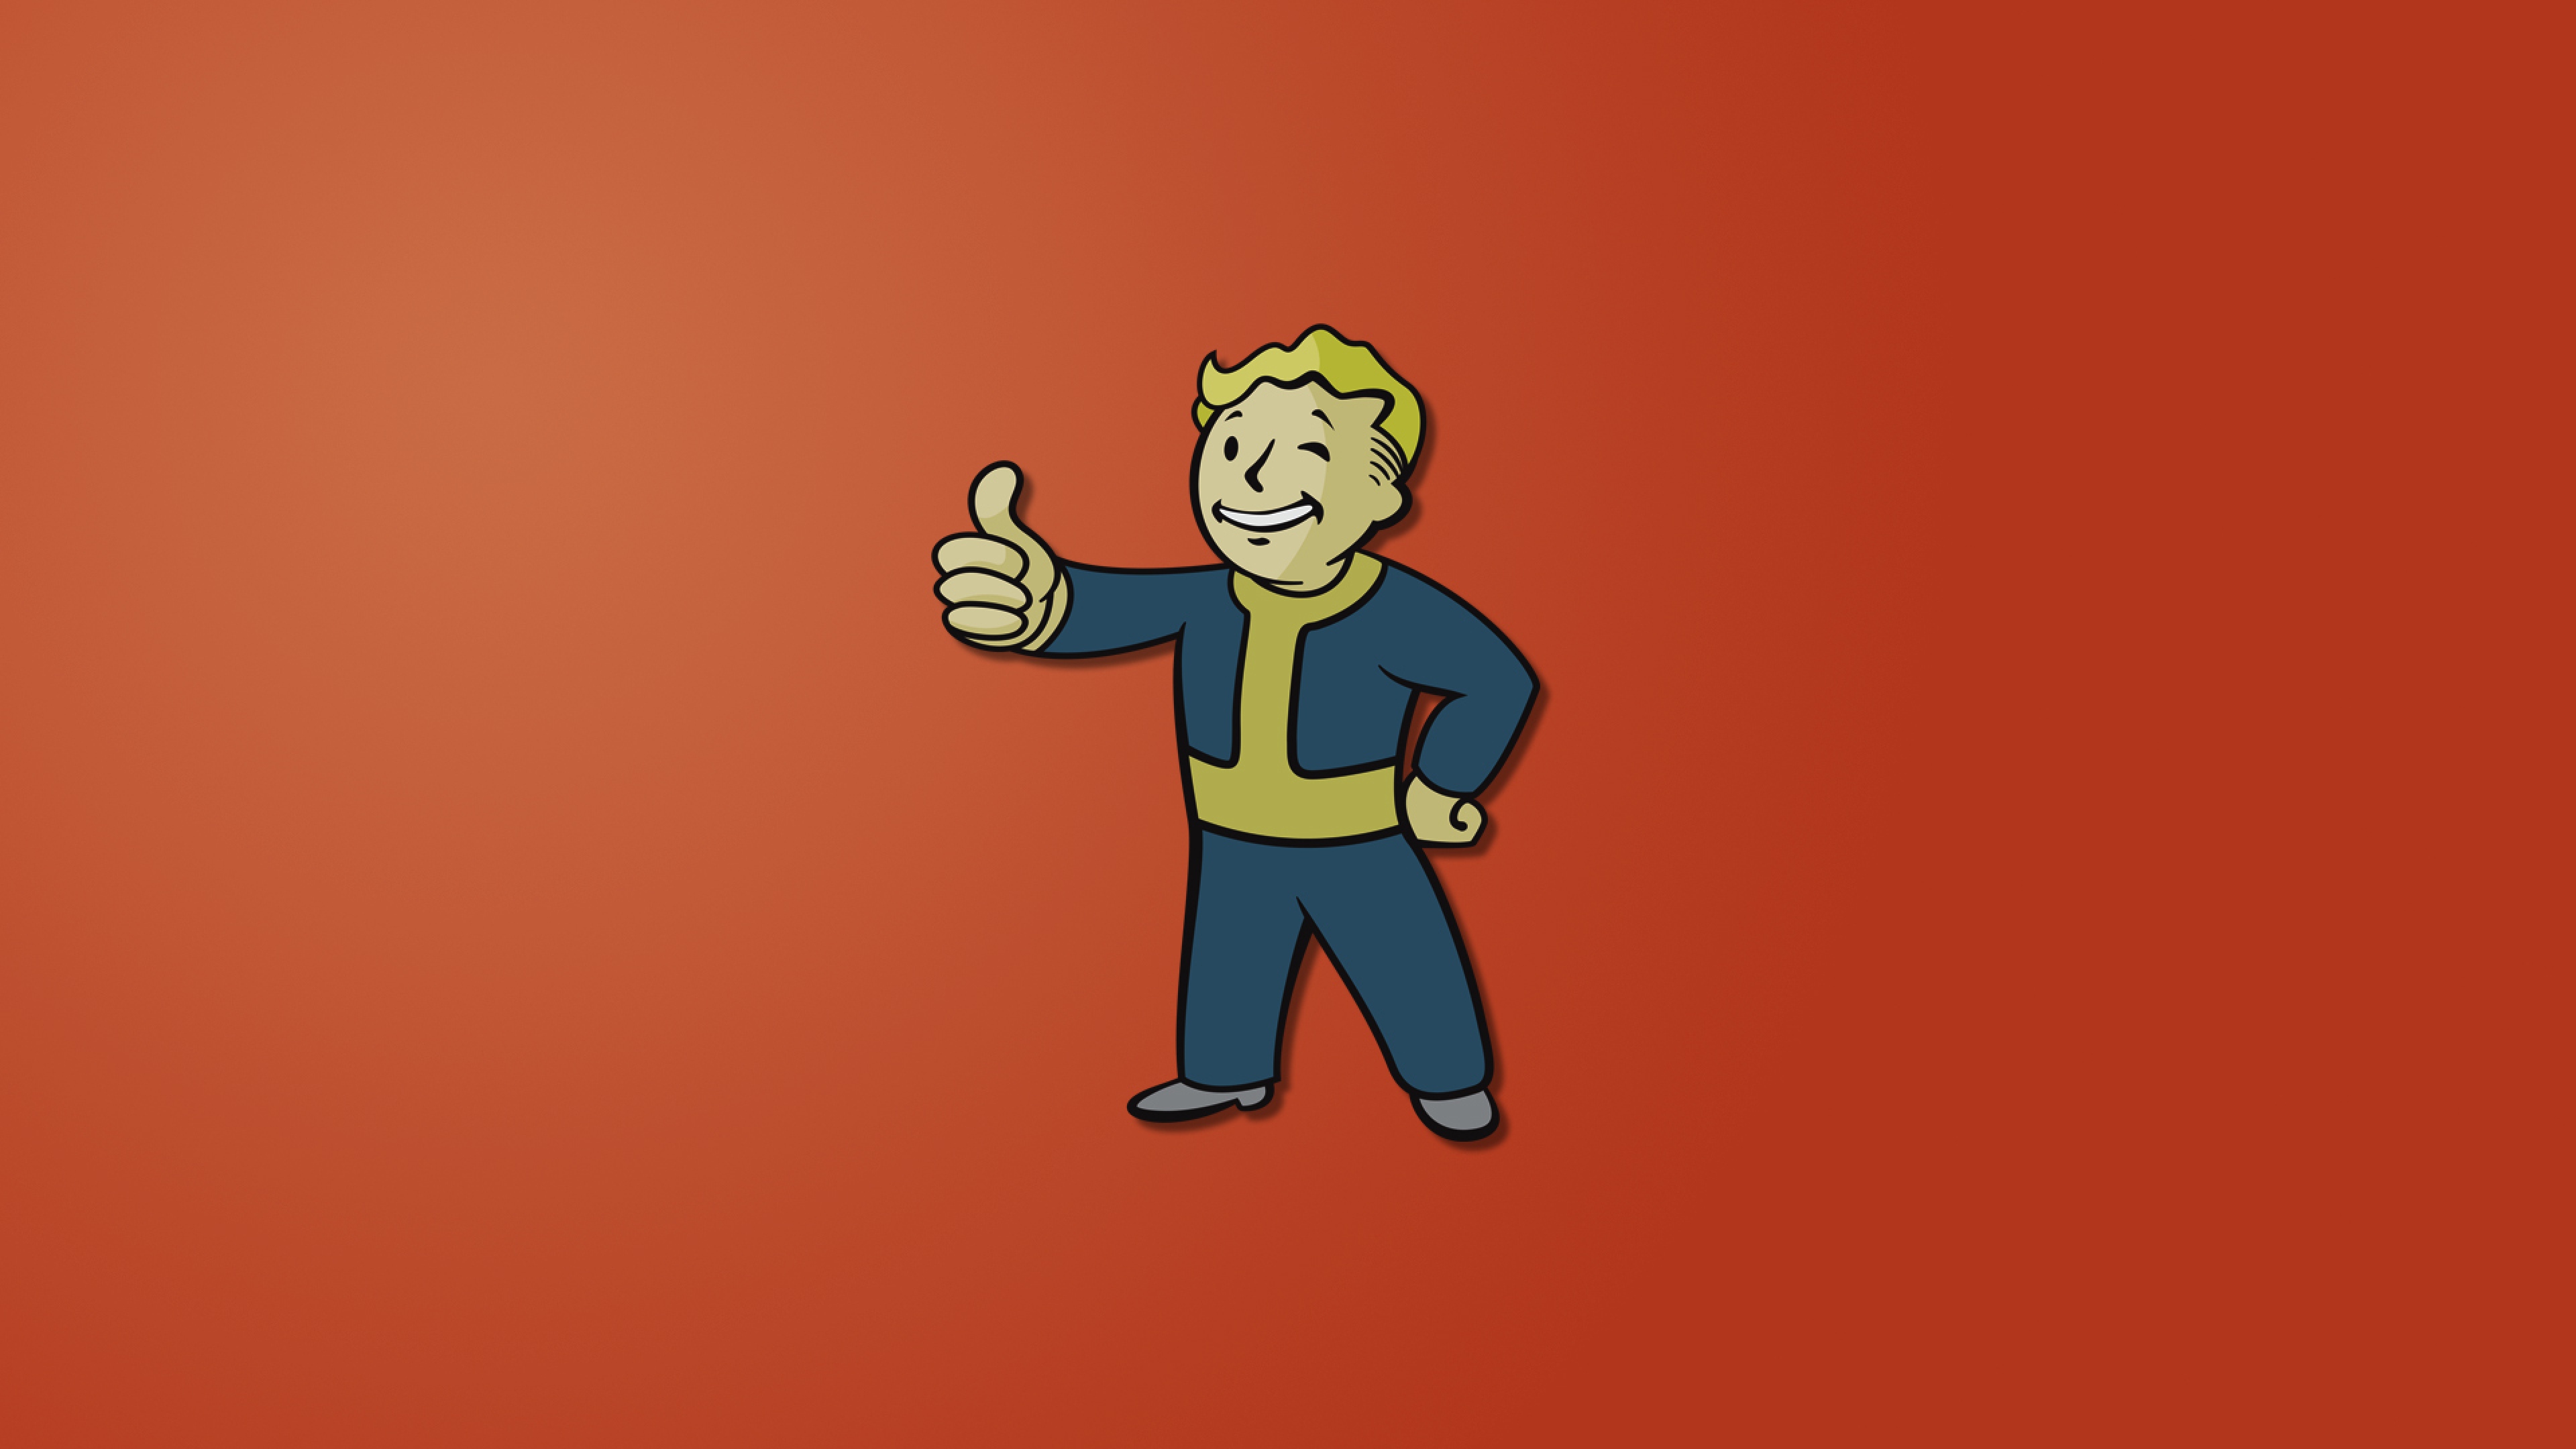 Fallout boy minimalism hd artist k wallpapers images backgrounds photos and pictures